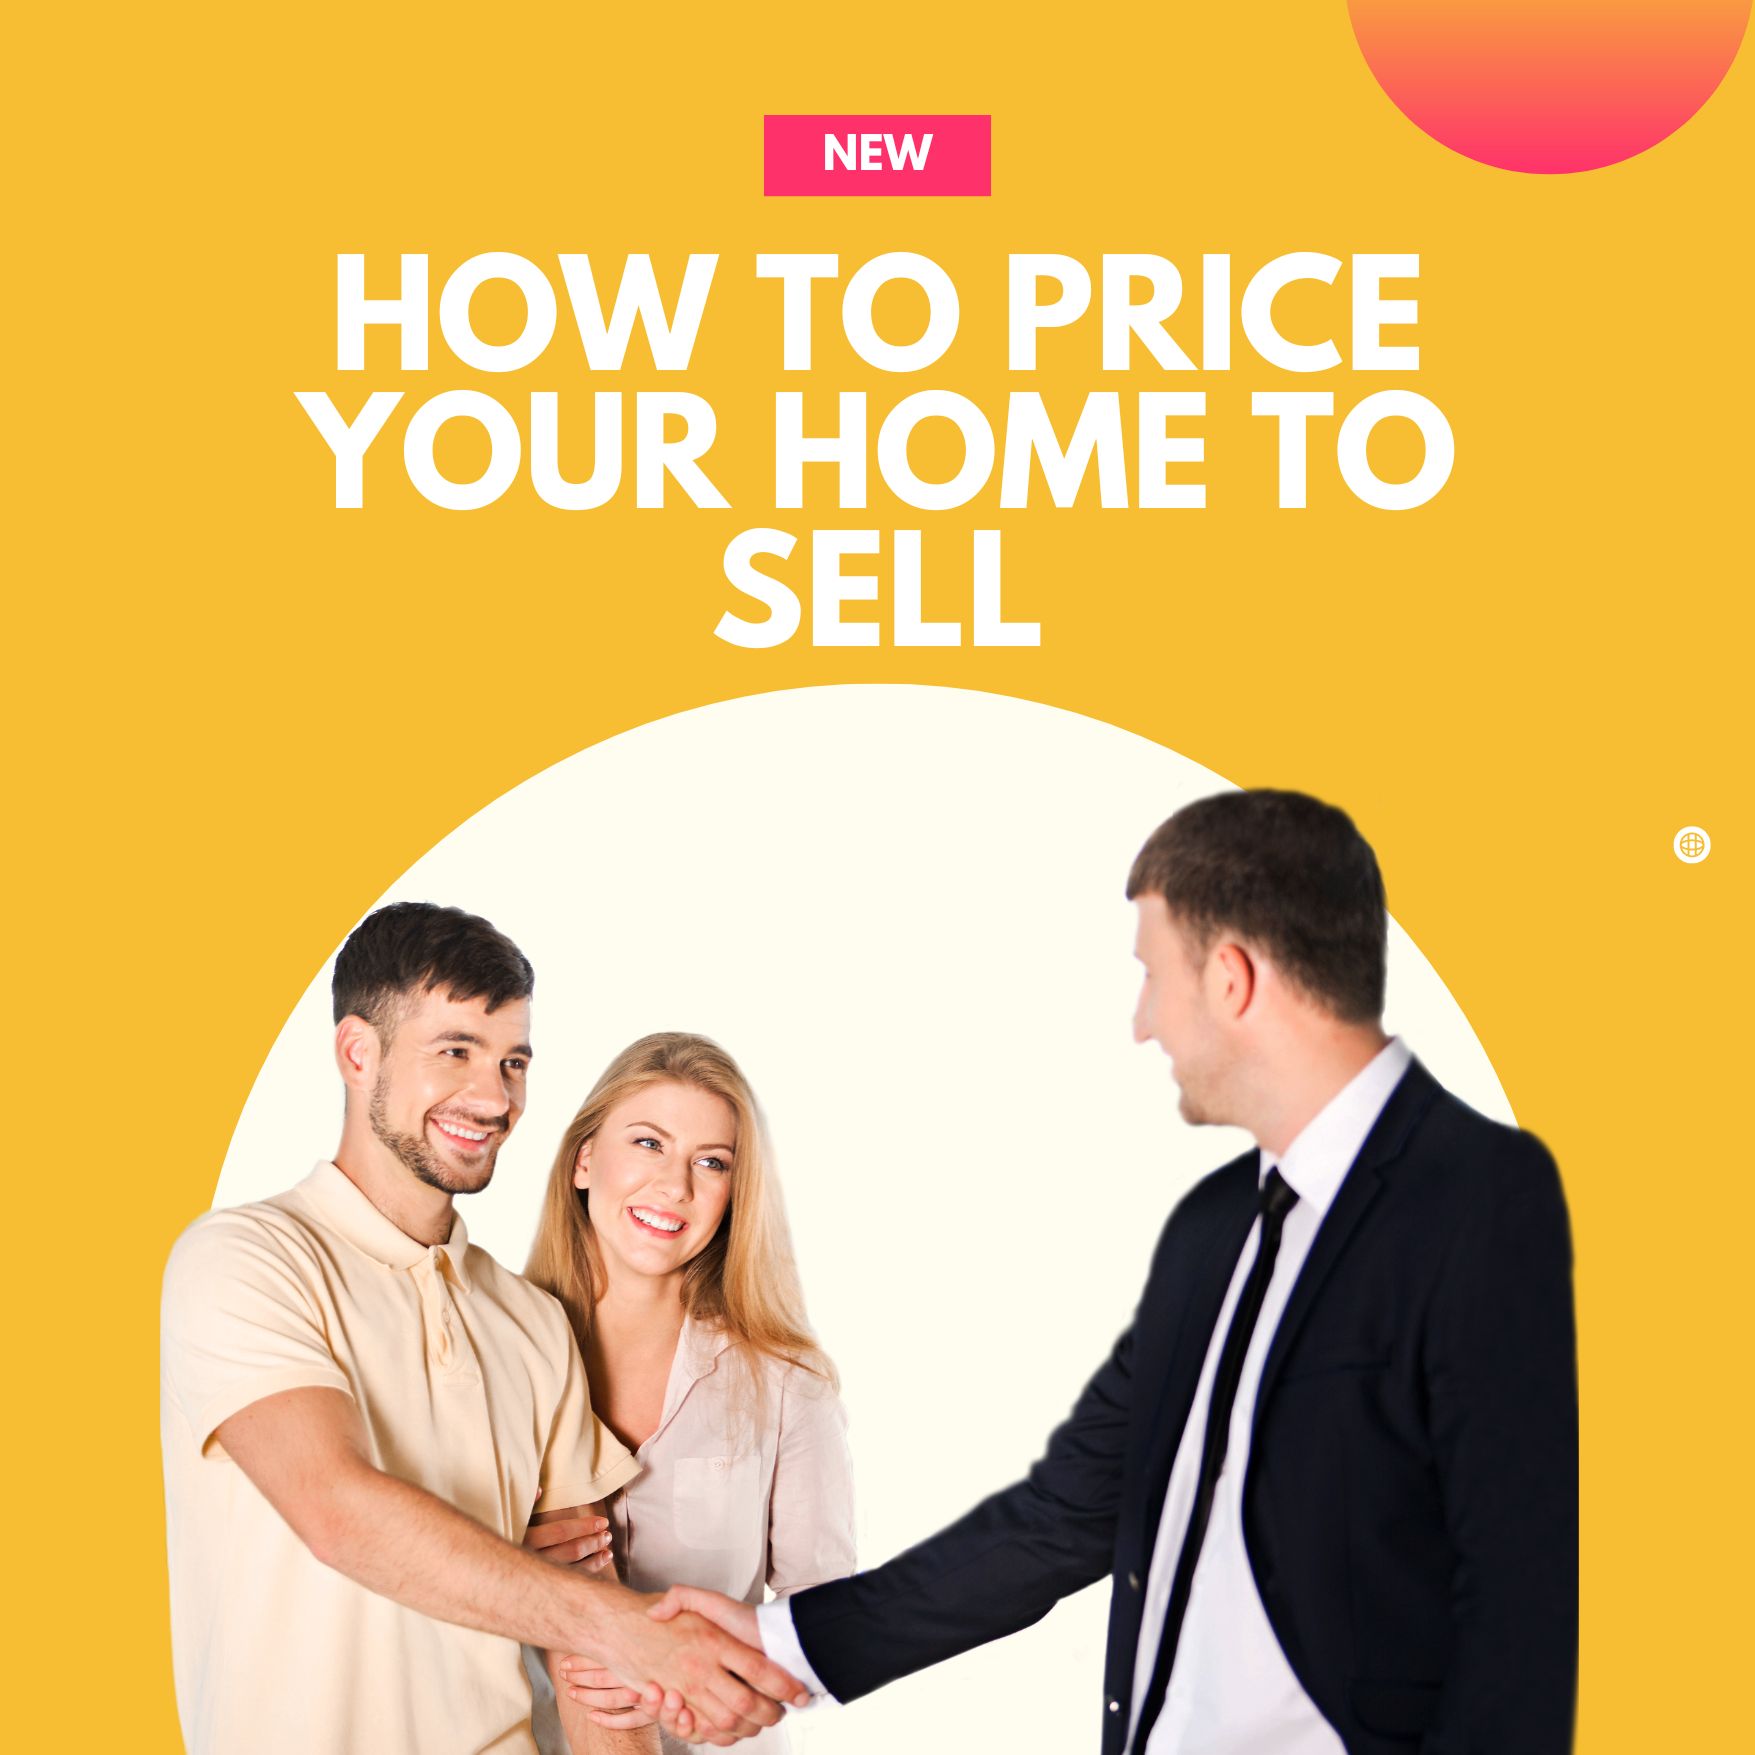 How to Price your Home to Sell